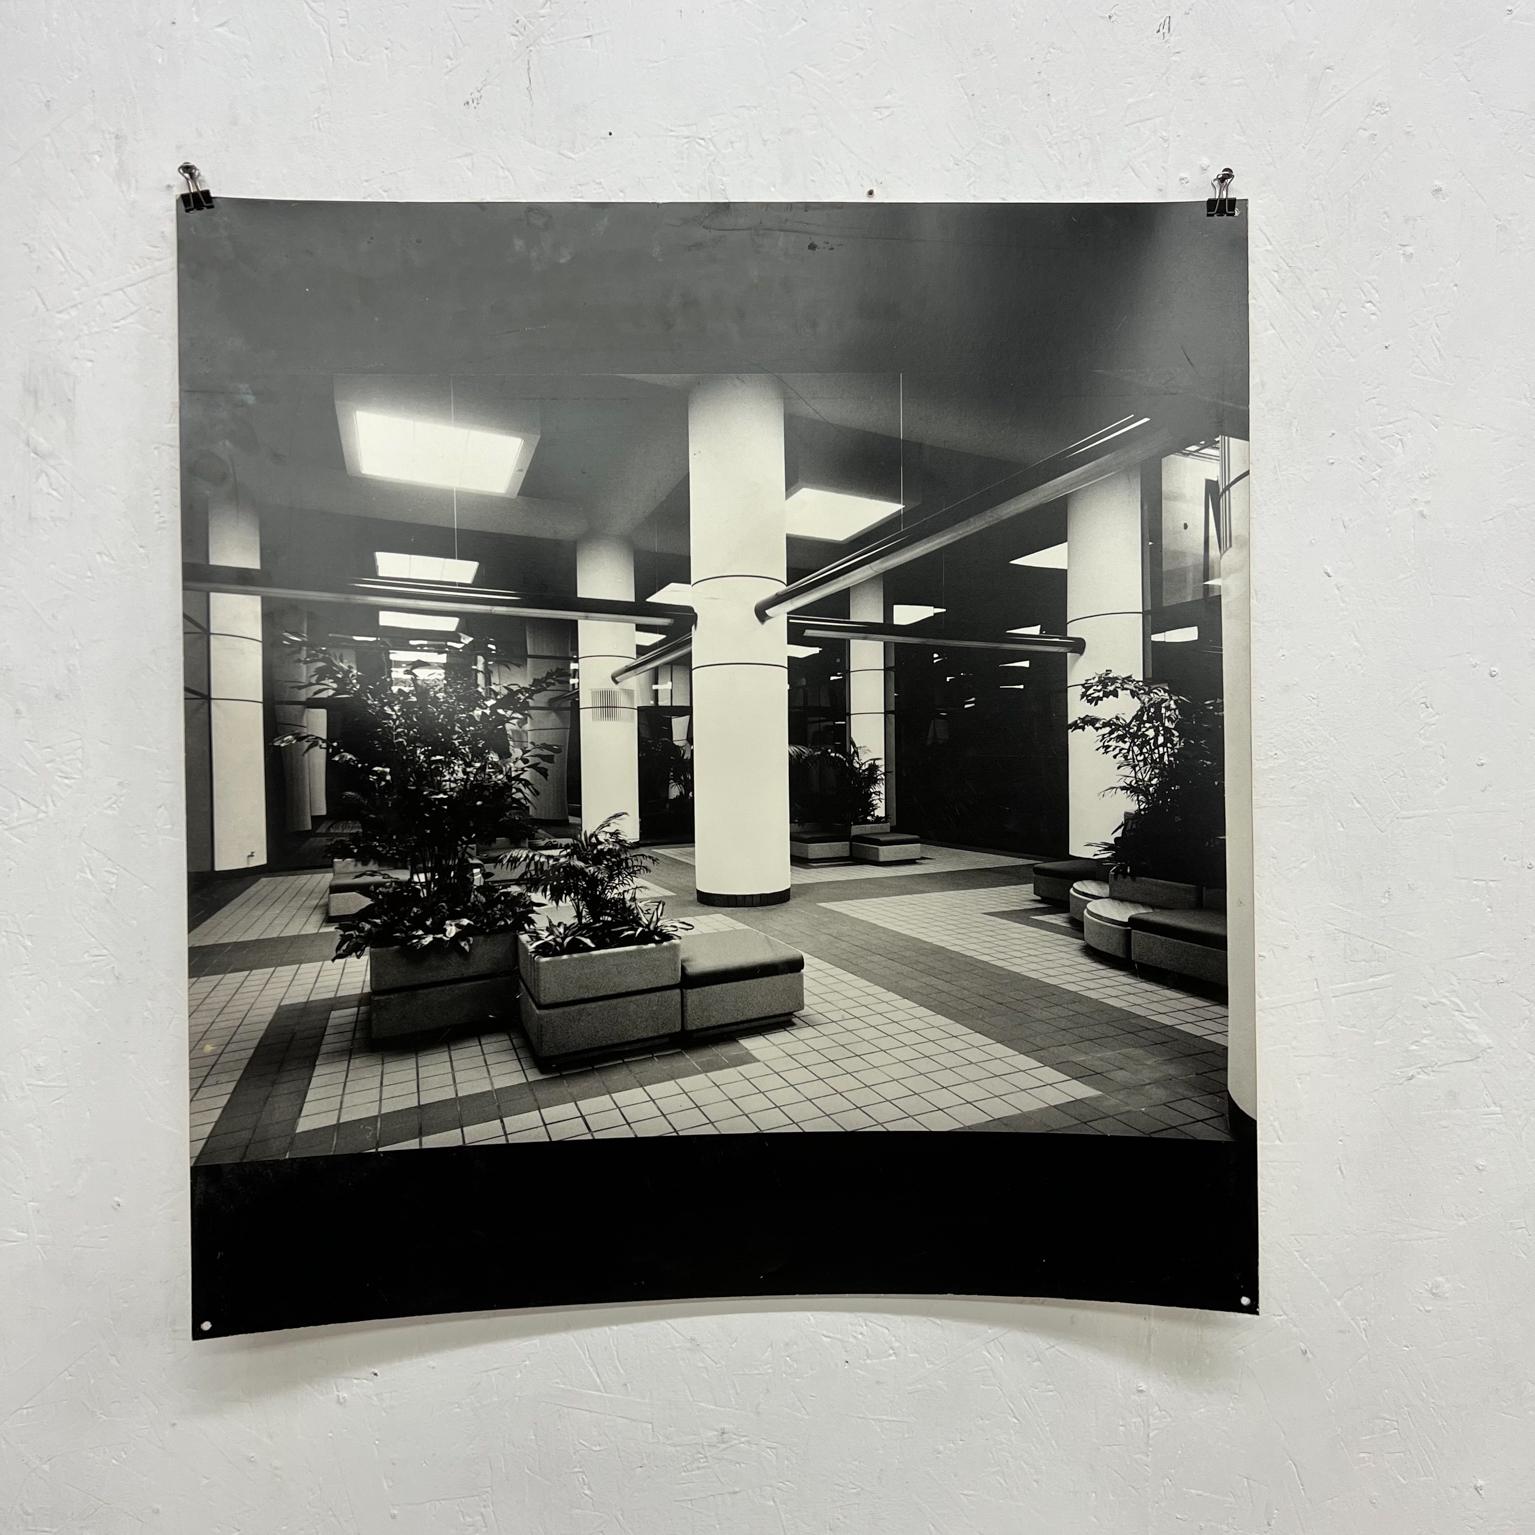 Mid-Century Modern ART black white building Atrium Photograph #1
30.75 x 29.5 W Art 21.5 x 29.5 W
Preowned unrestored vintage condition.
See images provided.
 